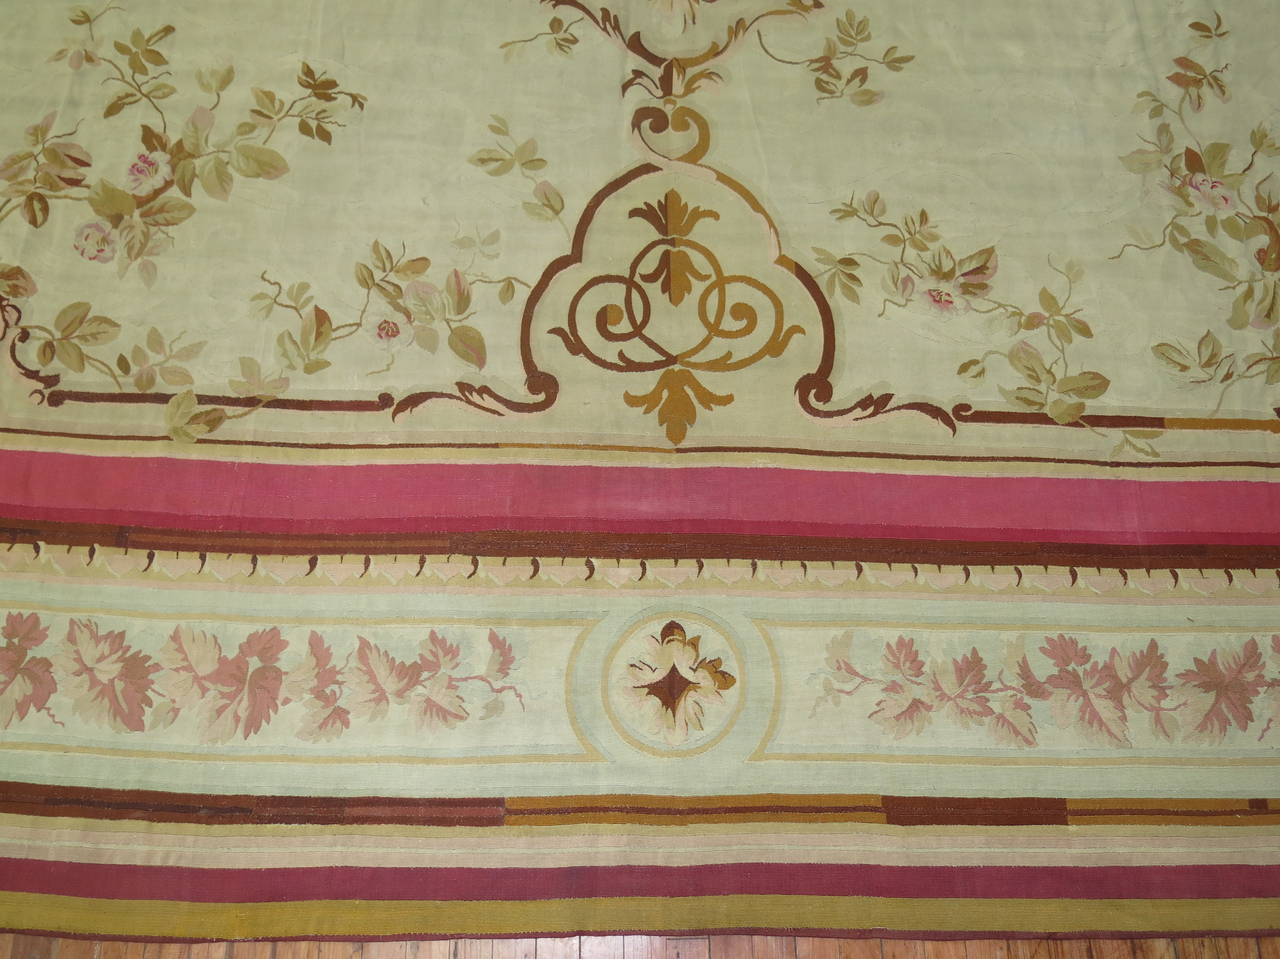 Classic 18th century French Aubusson with an ivory ground. Accents in pink and brown. Overall very good condition.

Size: 13'5” wide x 20'7” long

Aubusson rugs take its name from the French town Aubusson, lying on the banks of the Creuse River.